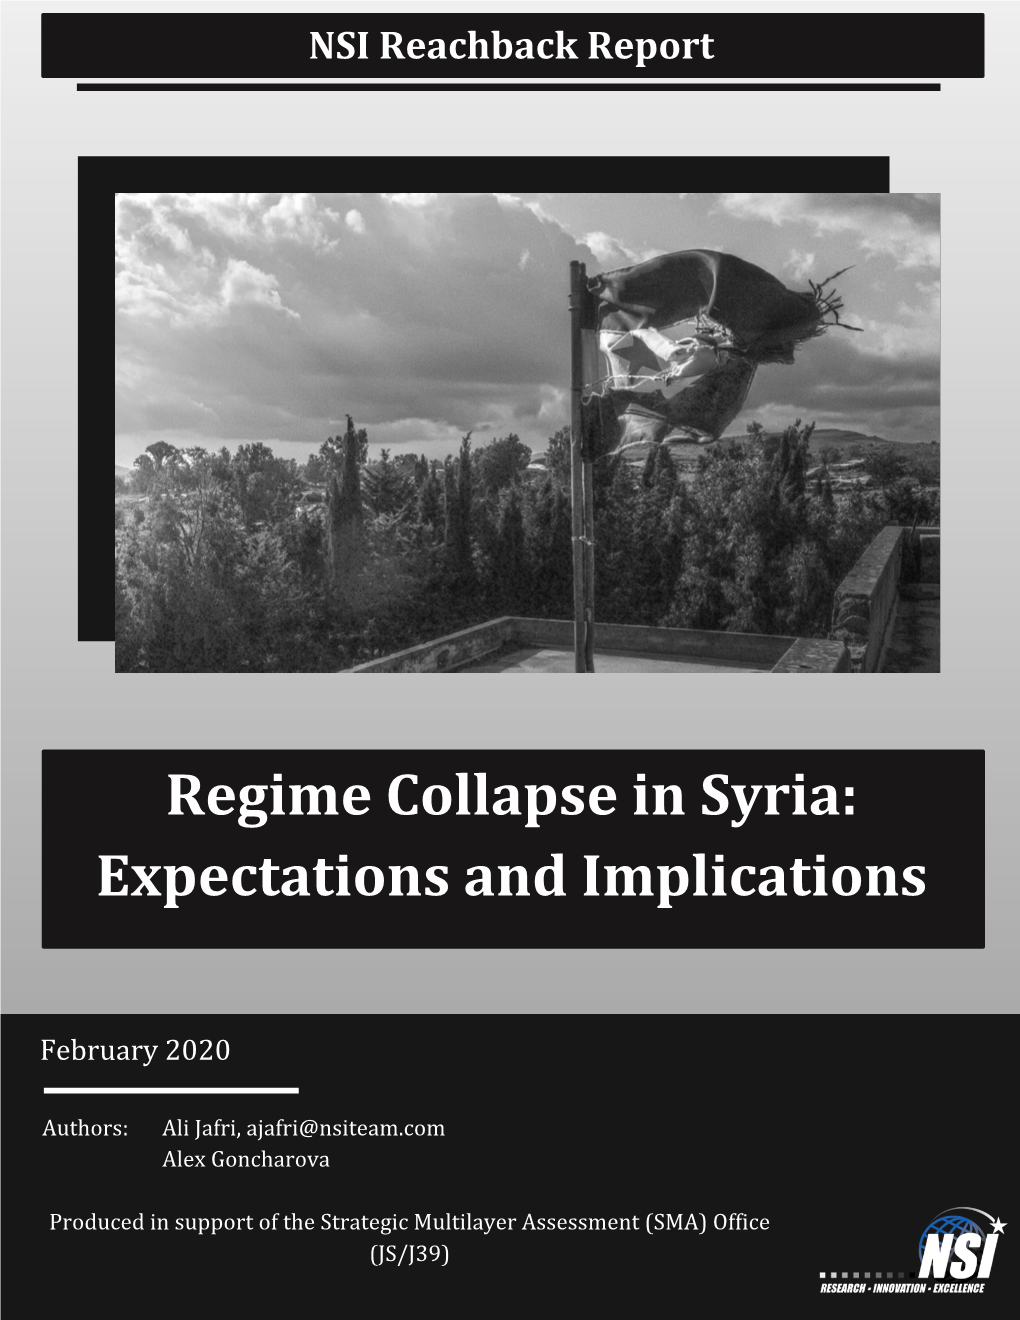 Regime Collapse in Syria: Expectations and Implications